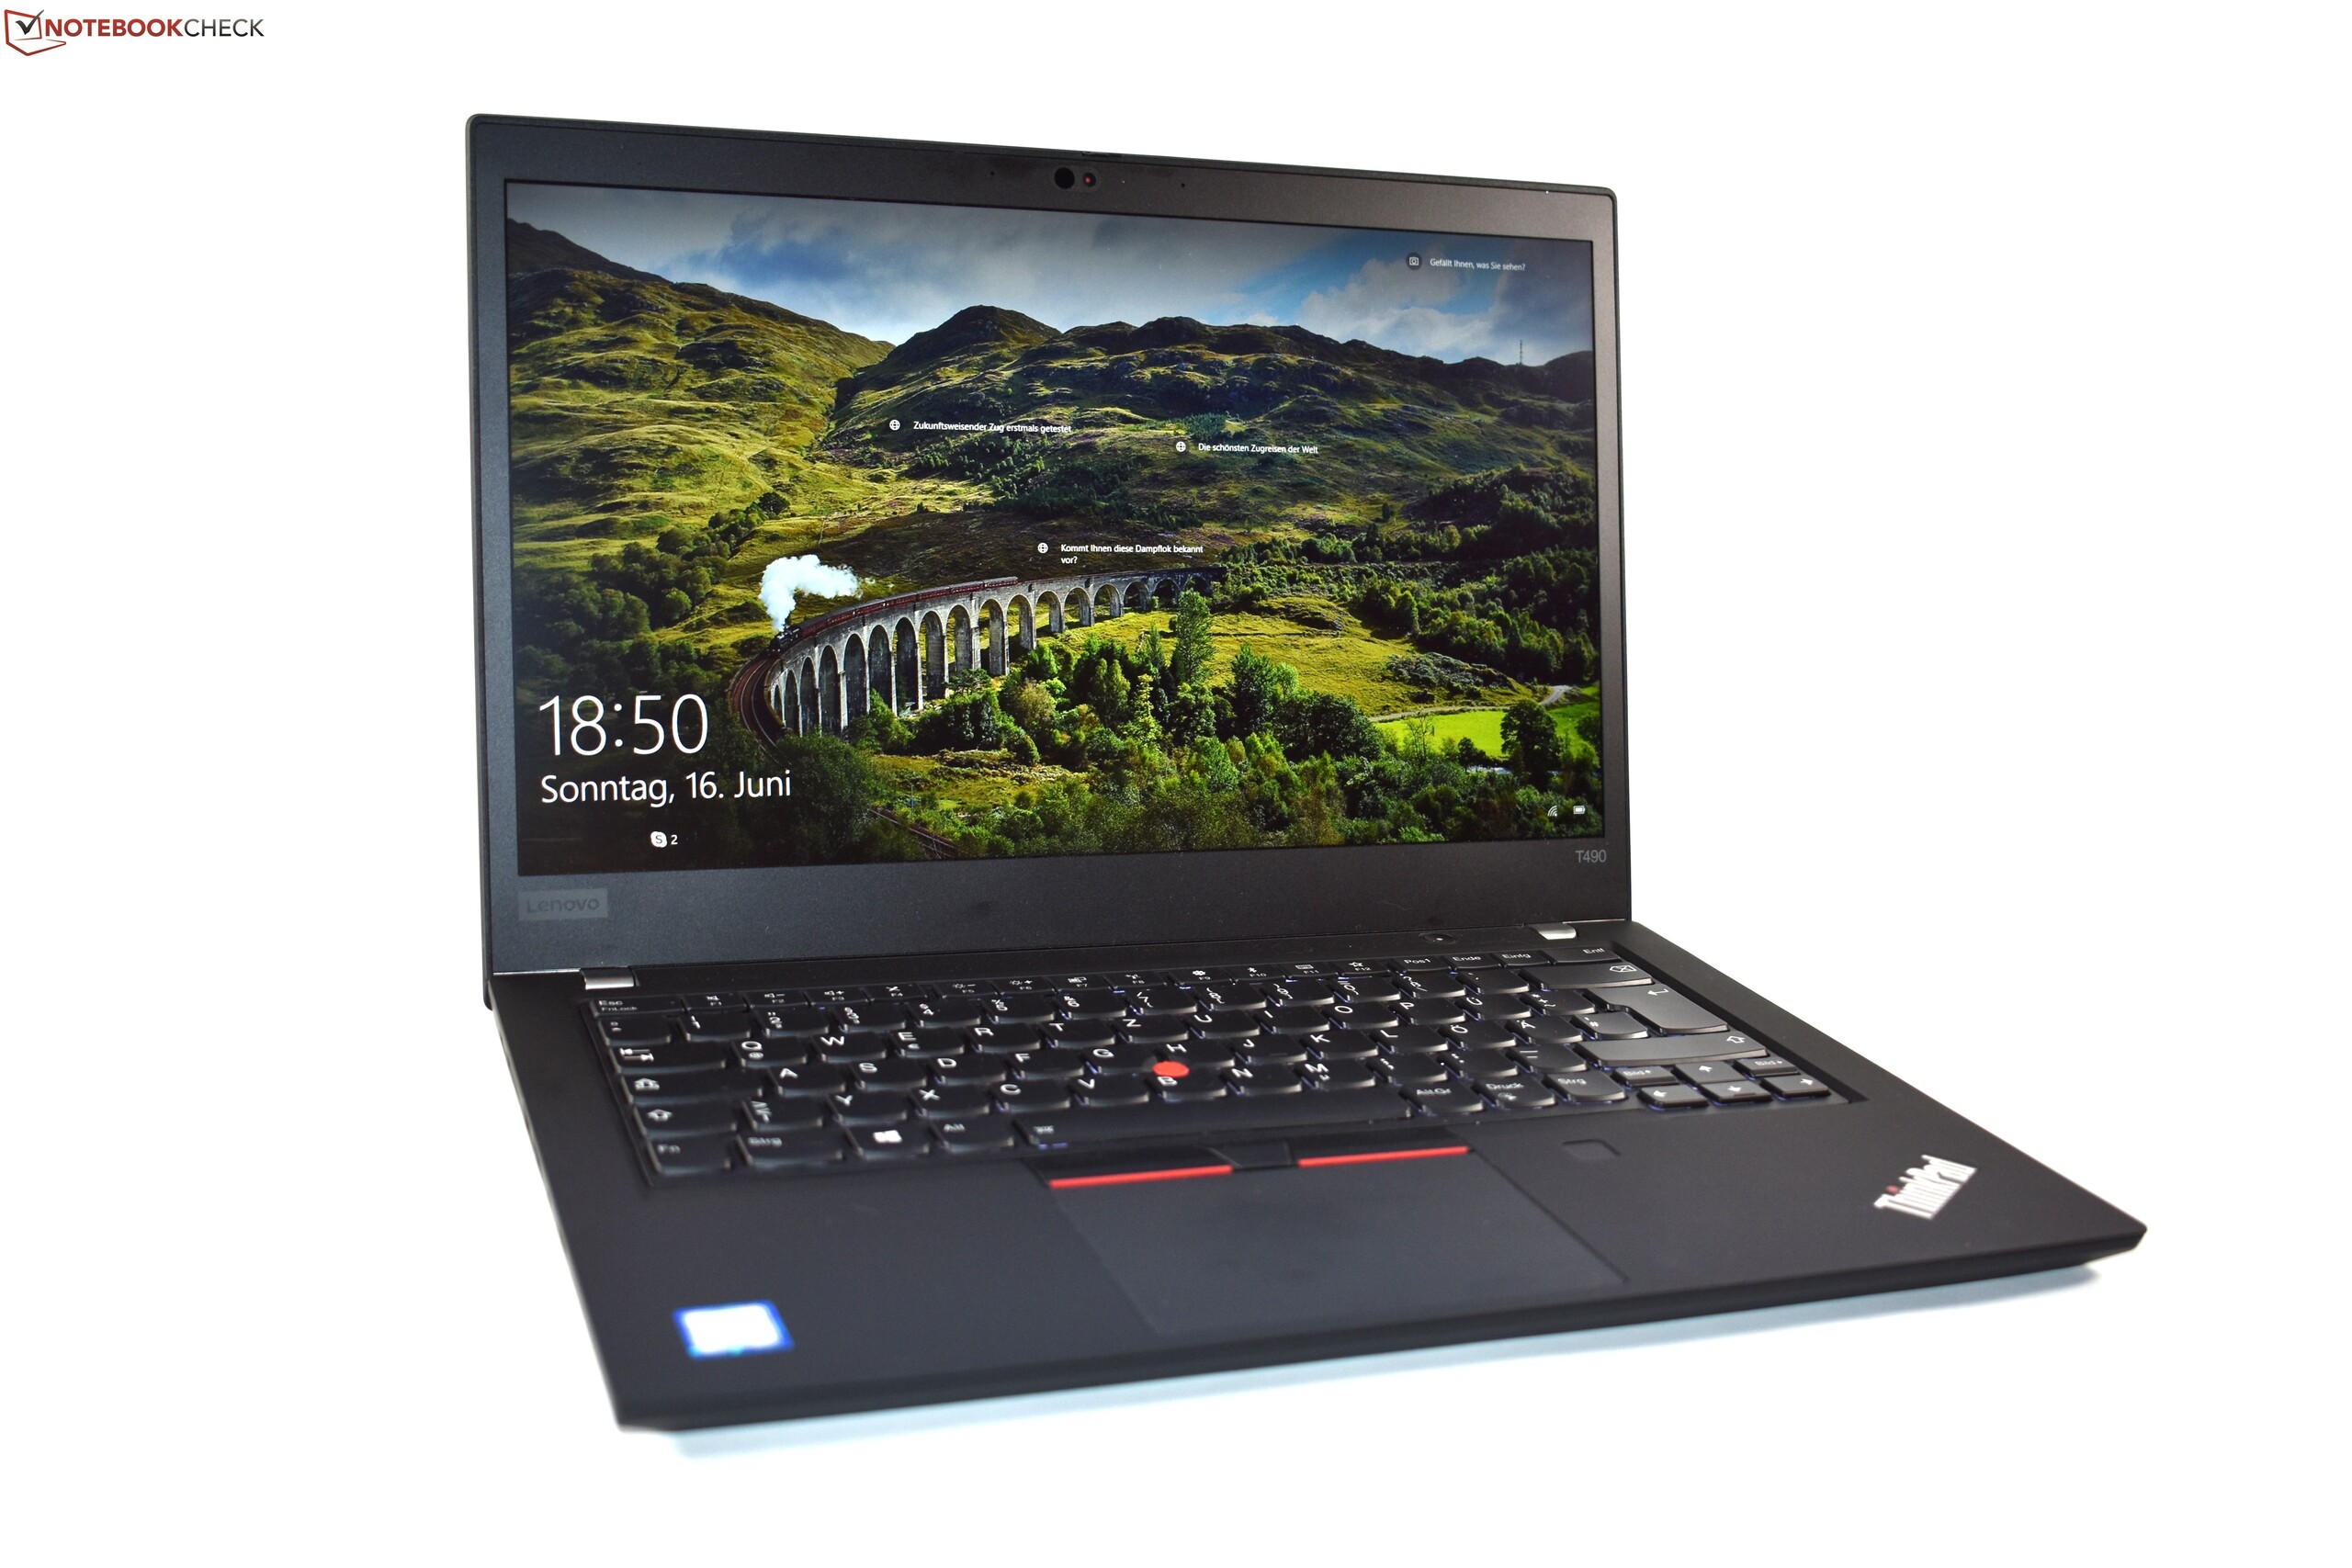 ThinkPad T490 Laptop Review: business laptop with long battery life and iGPU - NotebookCheck.net Reviews